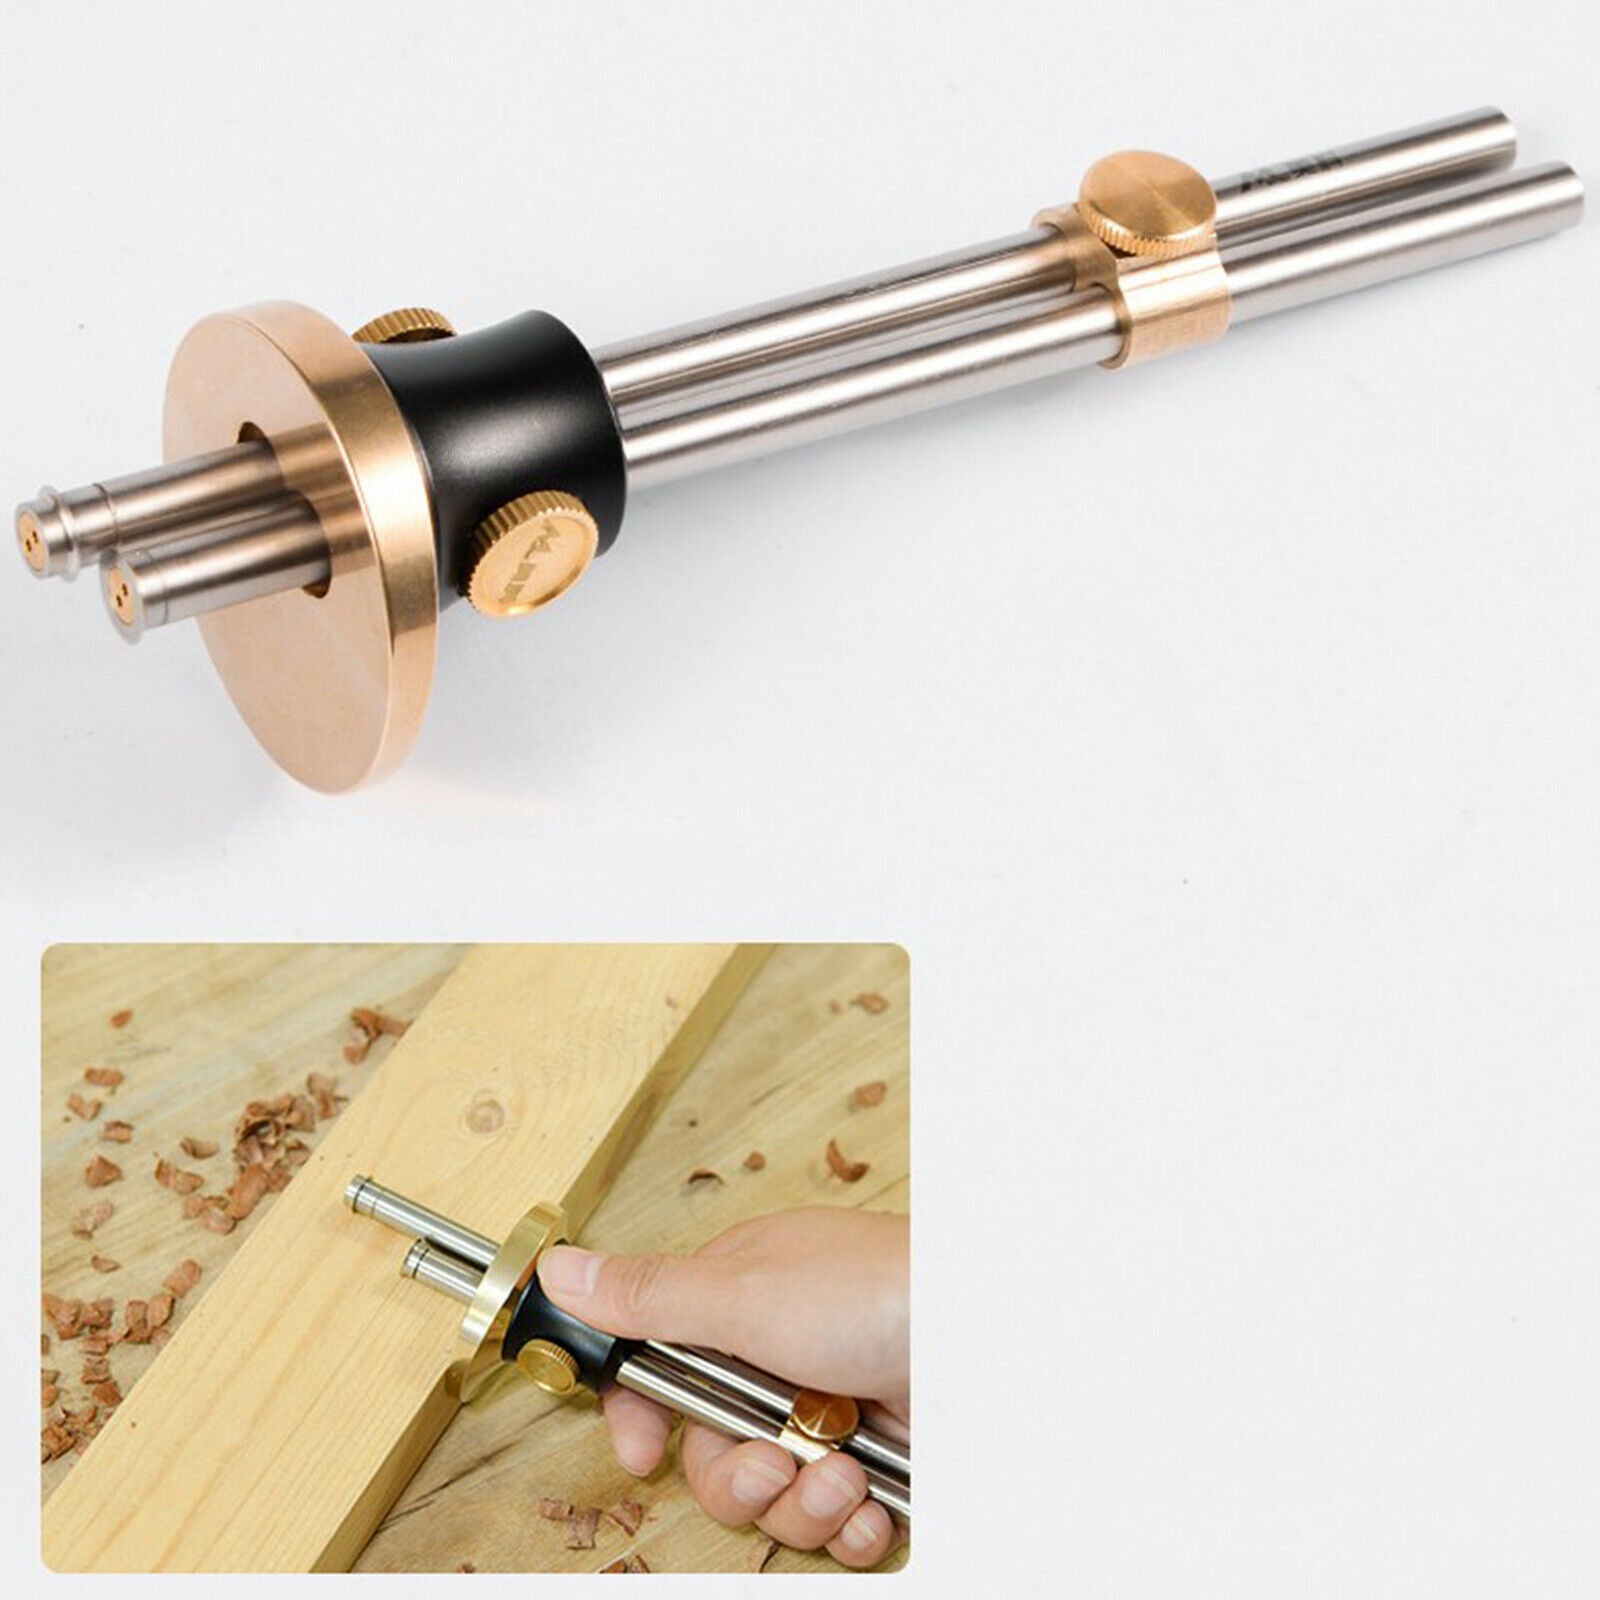 1pc Woodworking Double Axis Wheel Marking Gauge Mortise Gauge Precision